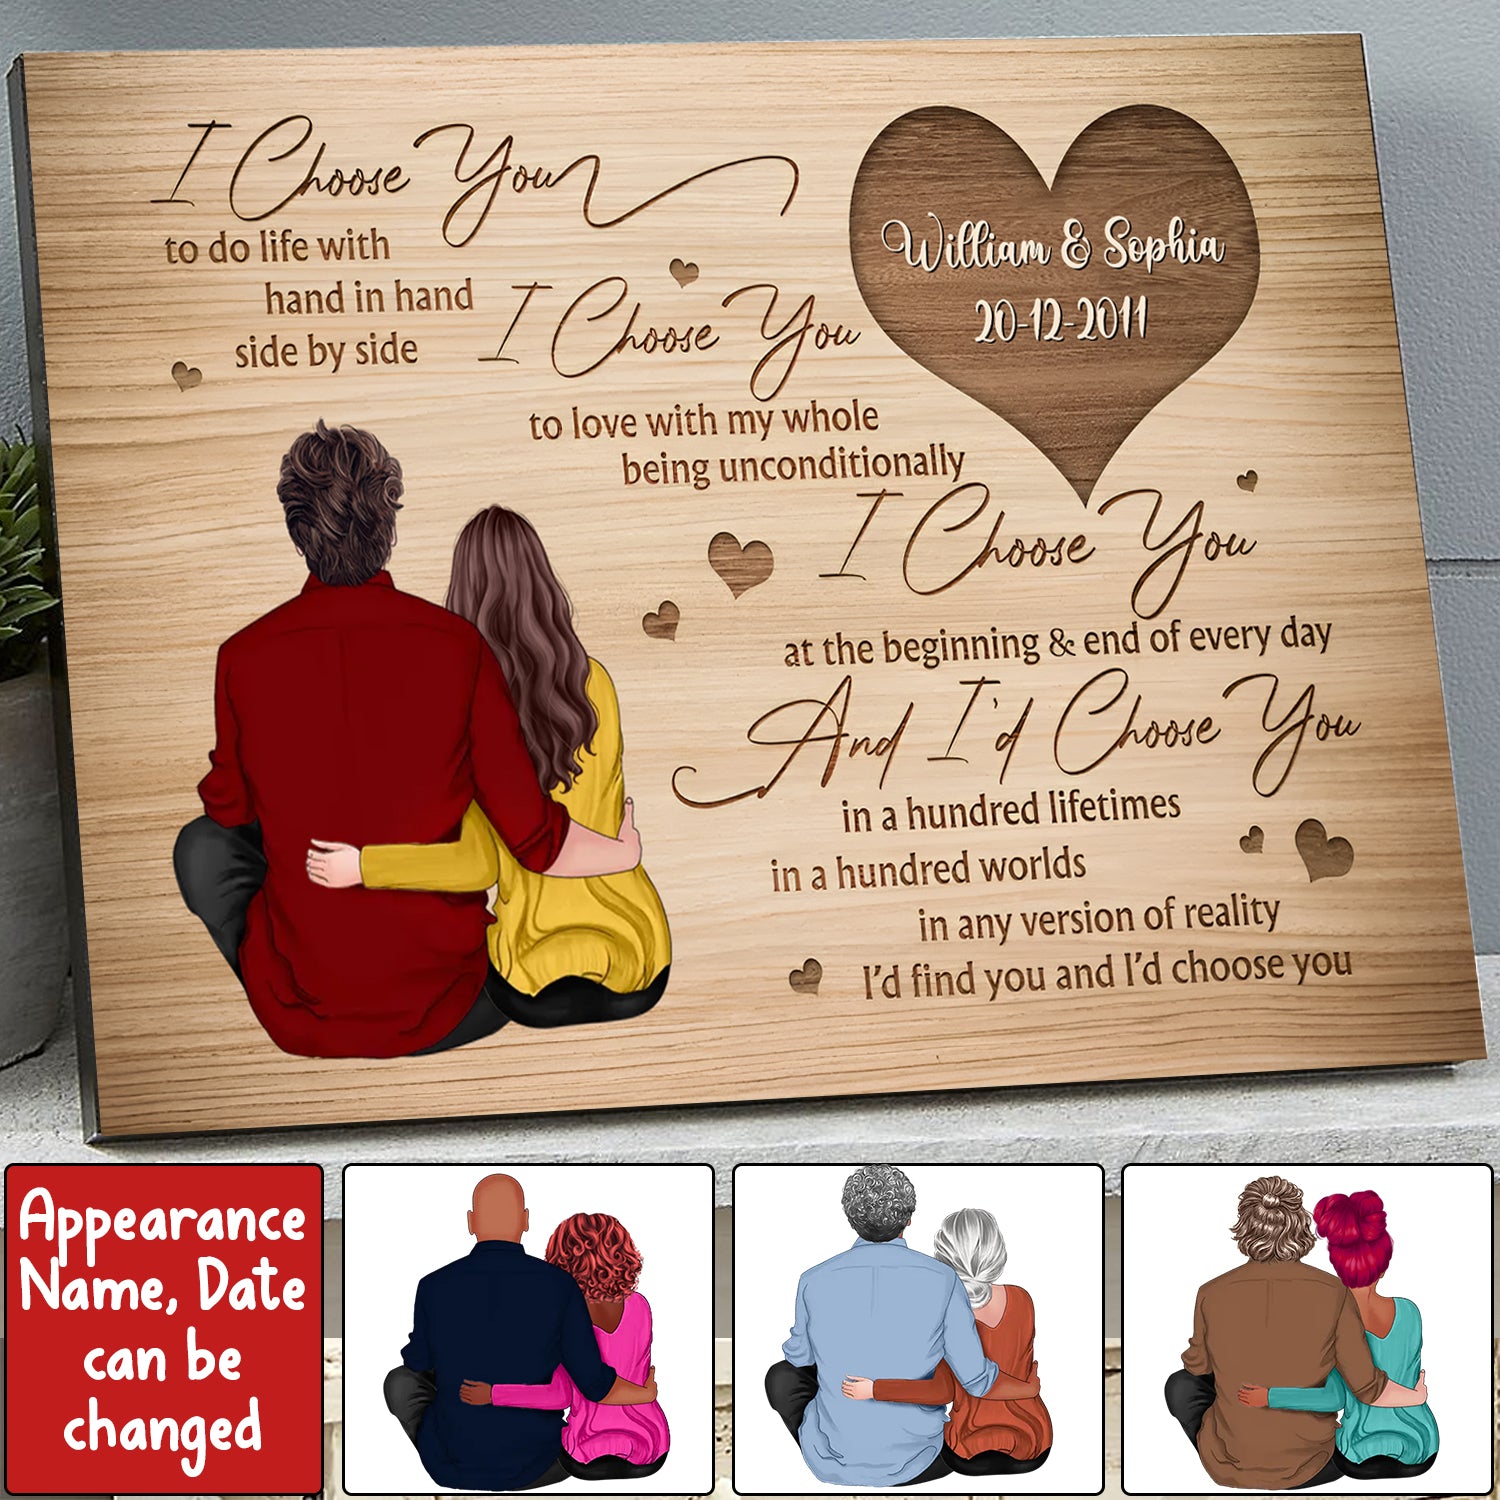 I Choose You At The Beginning & End Of Every Day - Personalized Appearances And Texts Canvas - Family Decor, Couple Gift